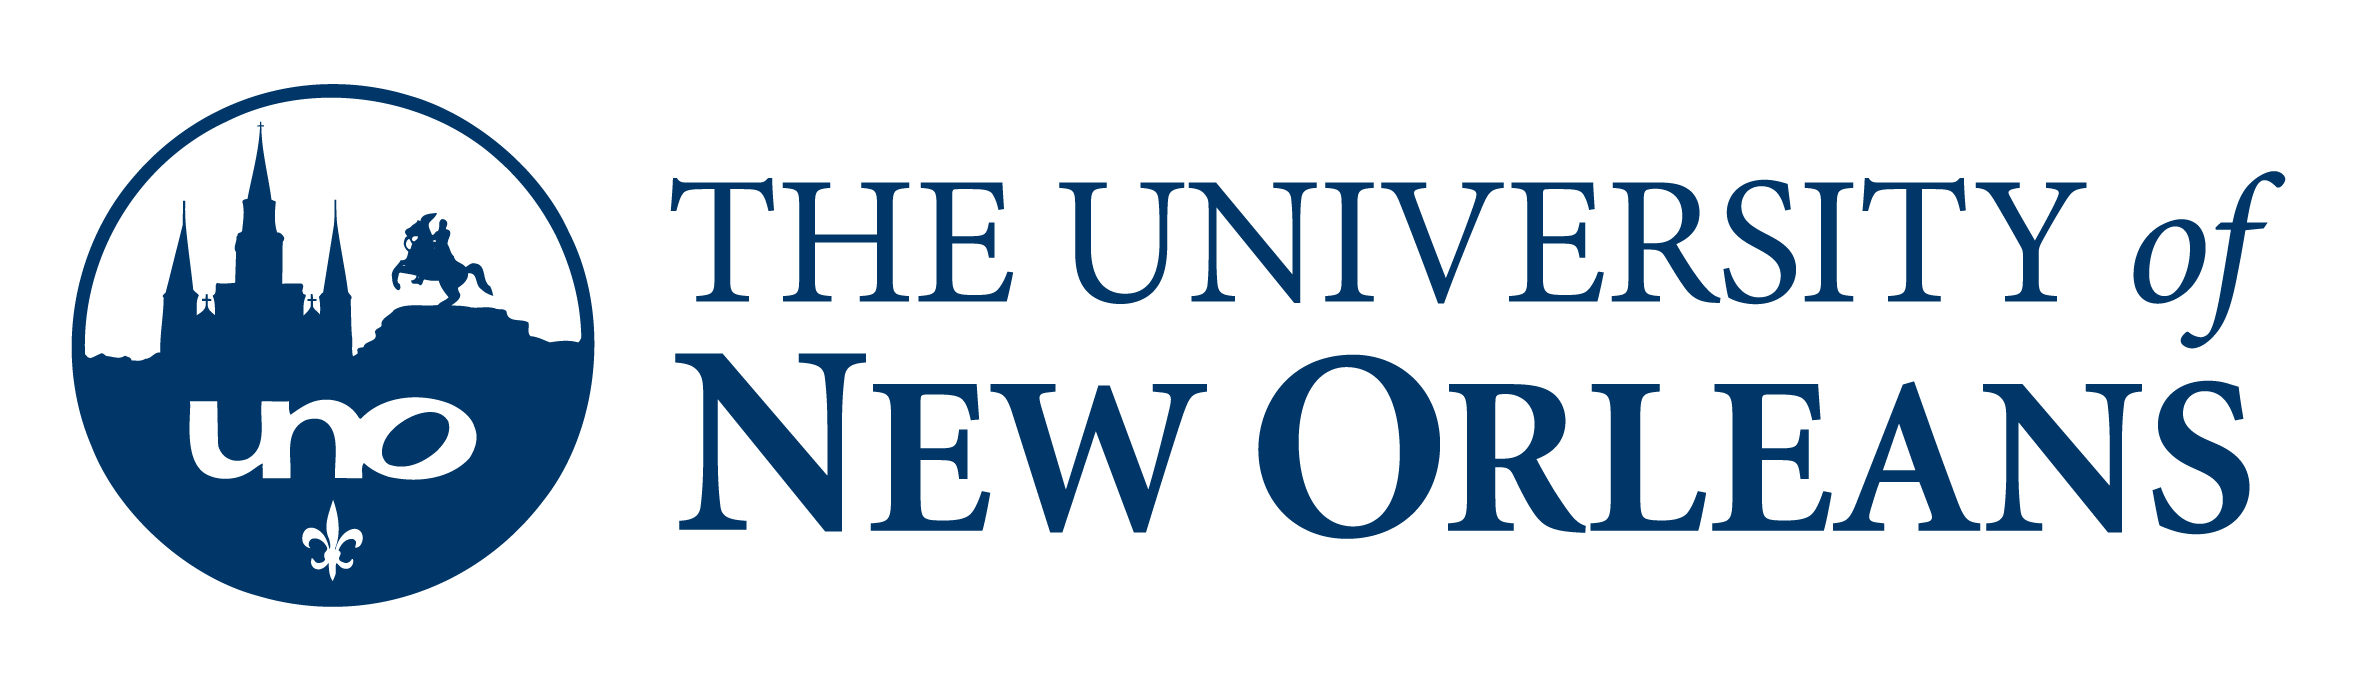 University of New Orleans Post Orders